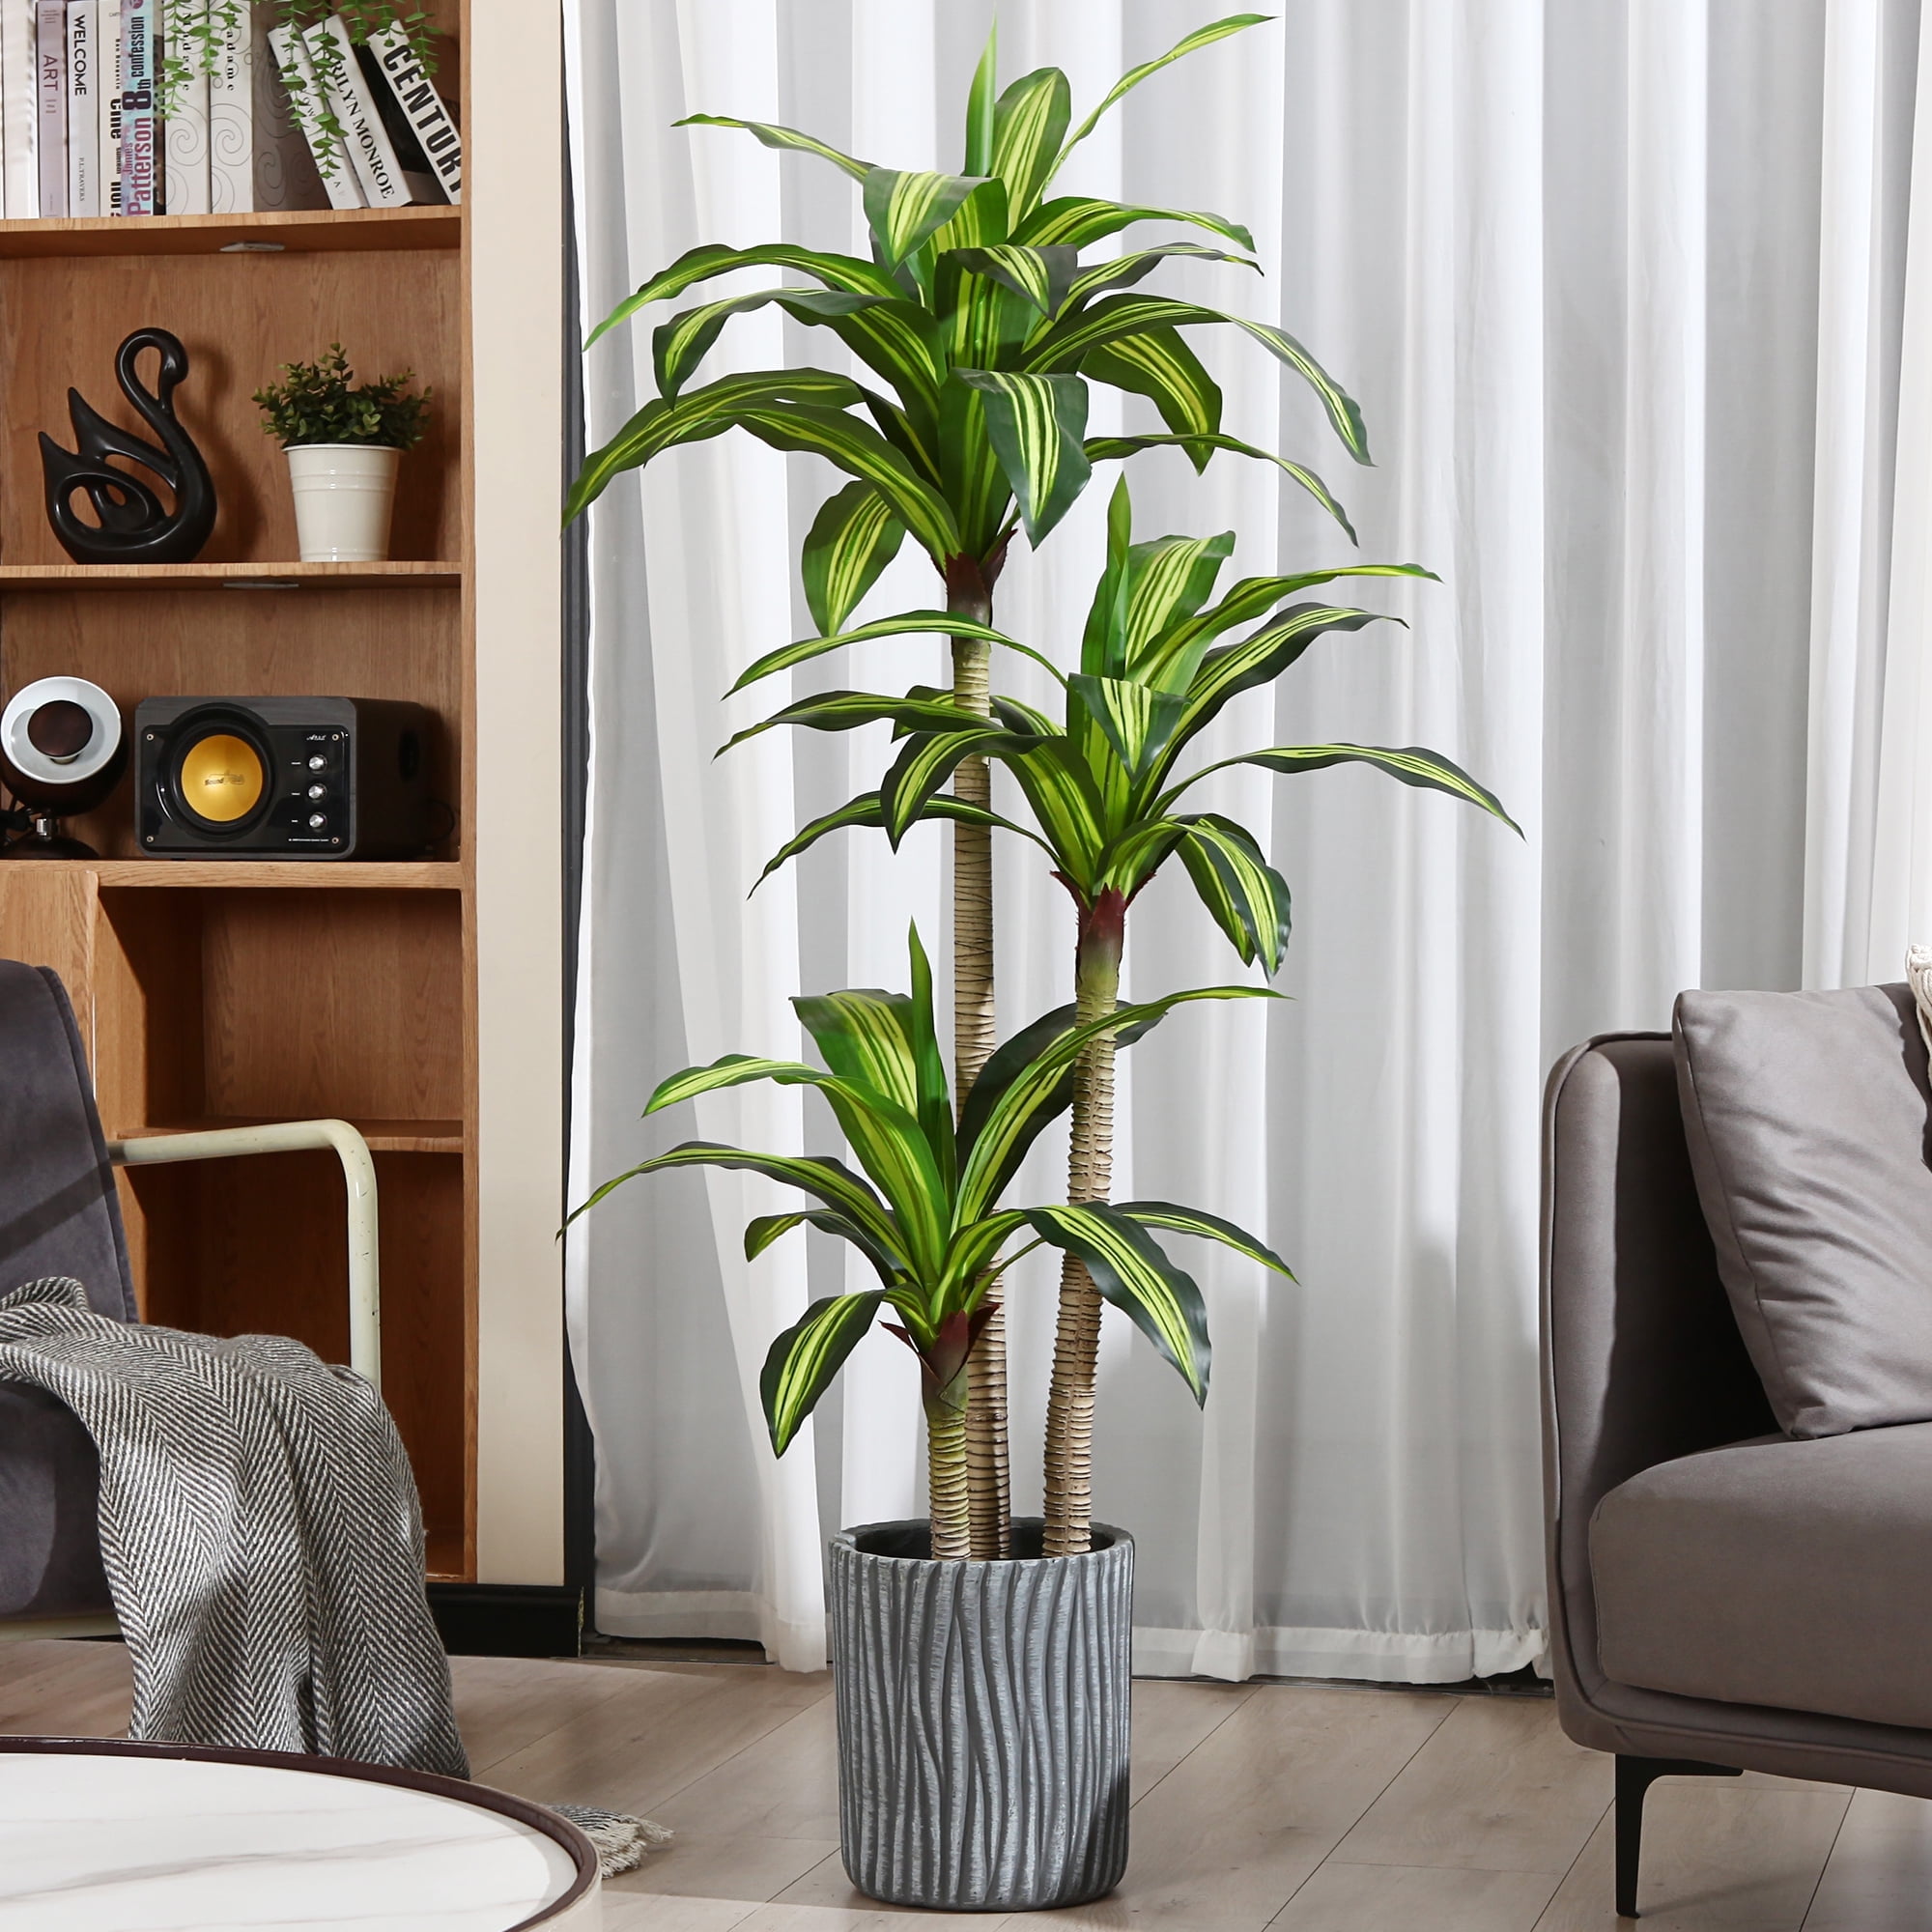 Decorating With Plants: How to Incorporate Plants Into Your Home Decor